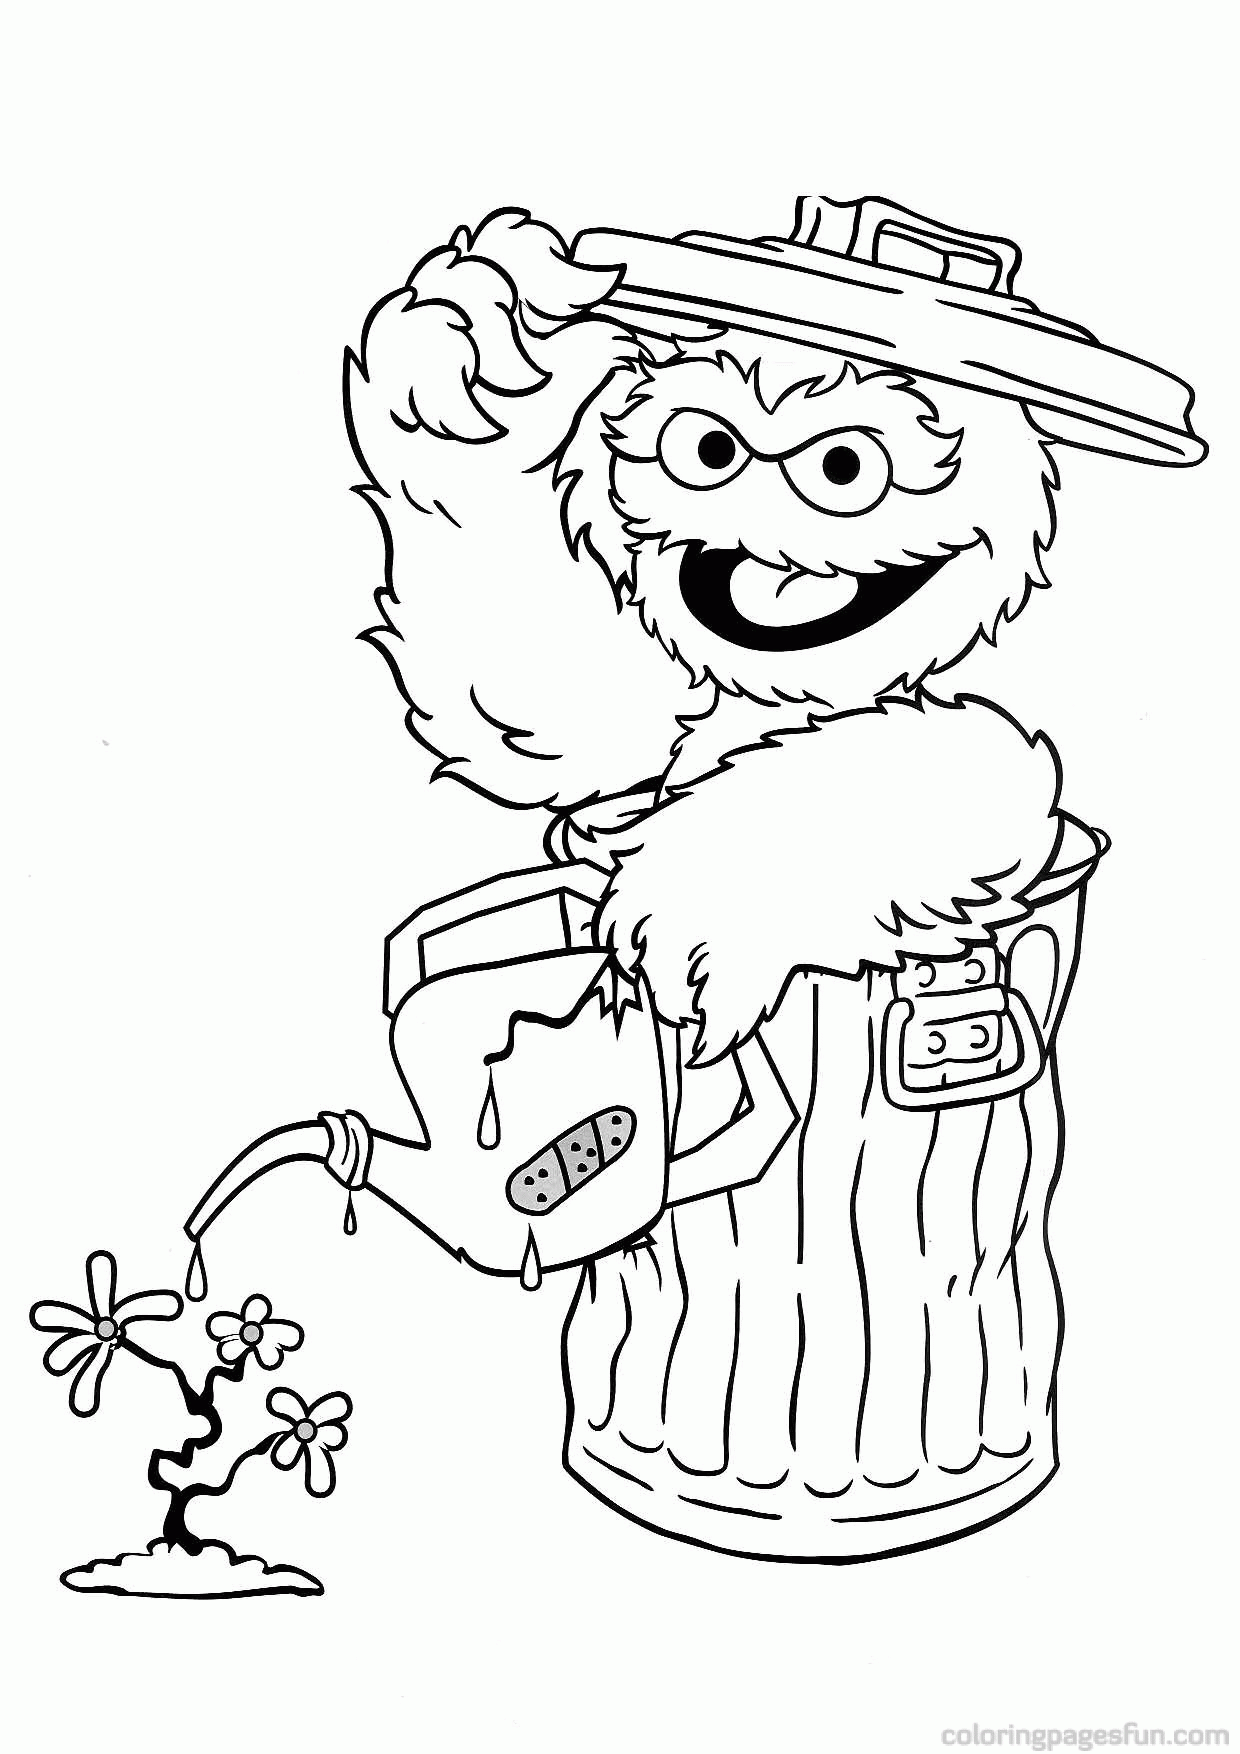 Printable Sesame Street Coloring Pages | Coloring Me